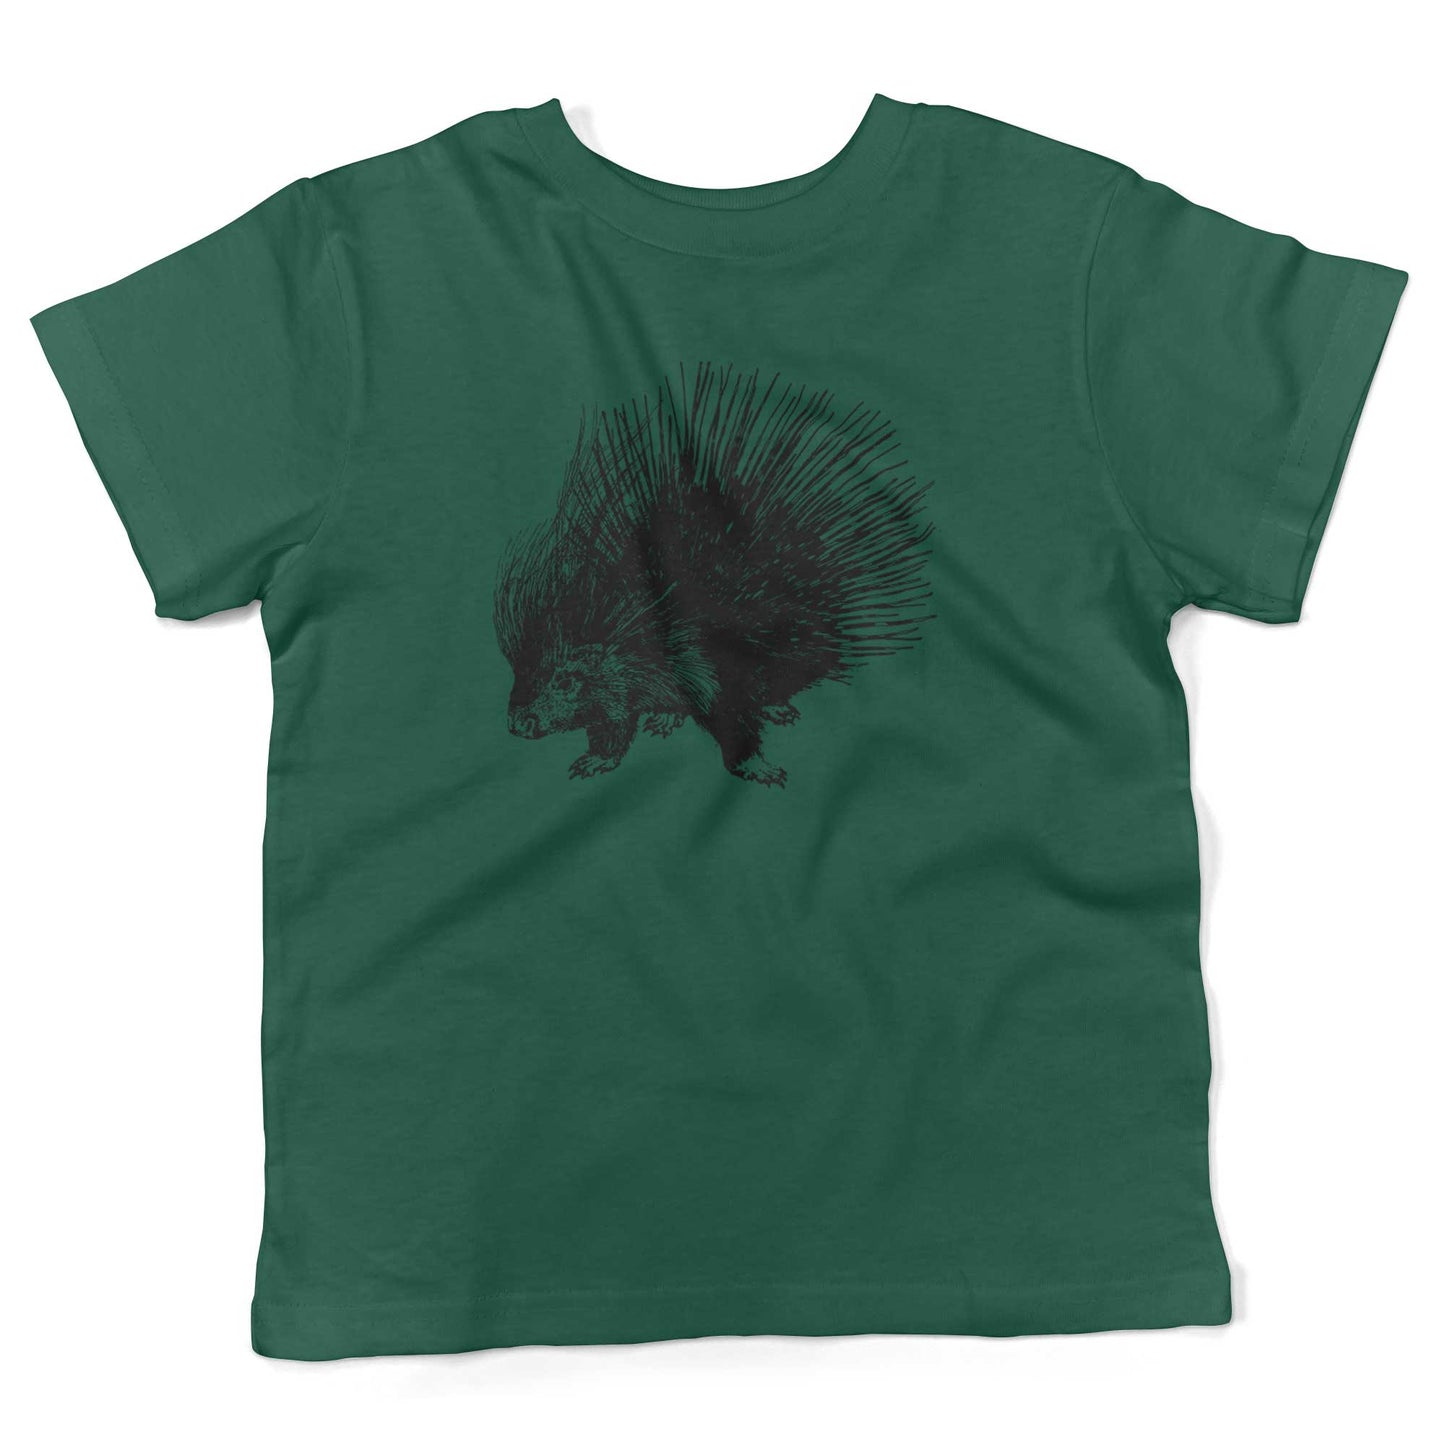 Cute Porcupine Toddler Shirt-Kelly Green-2T